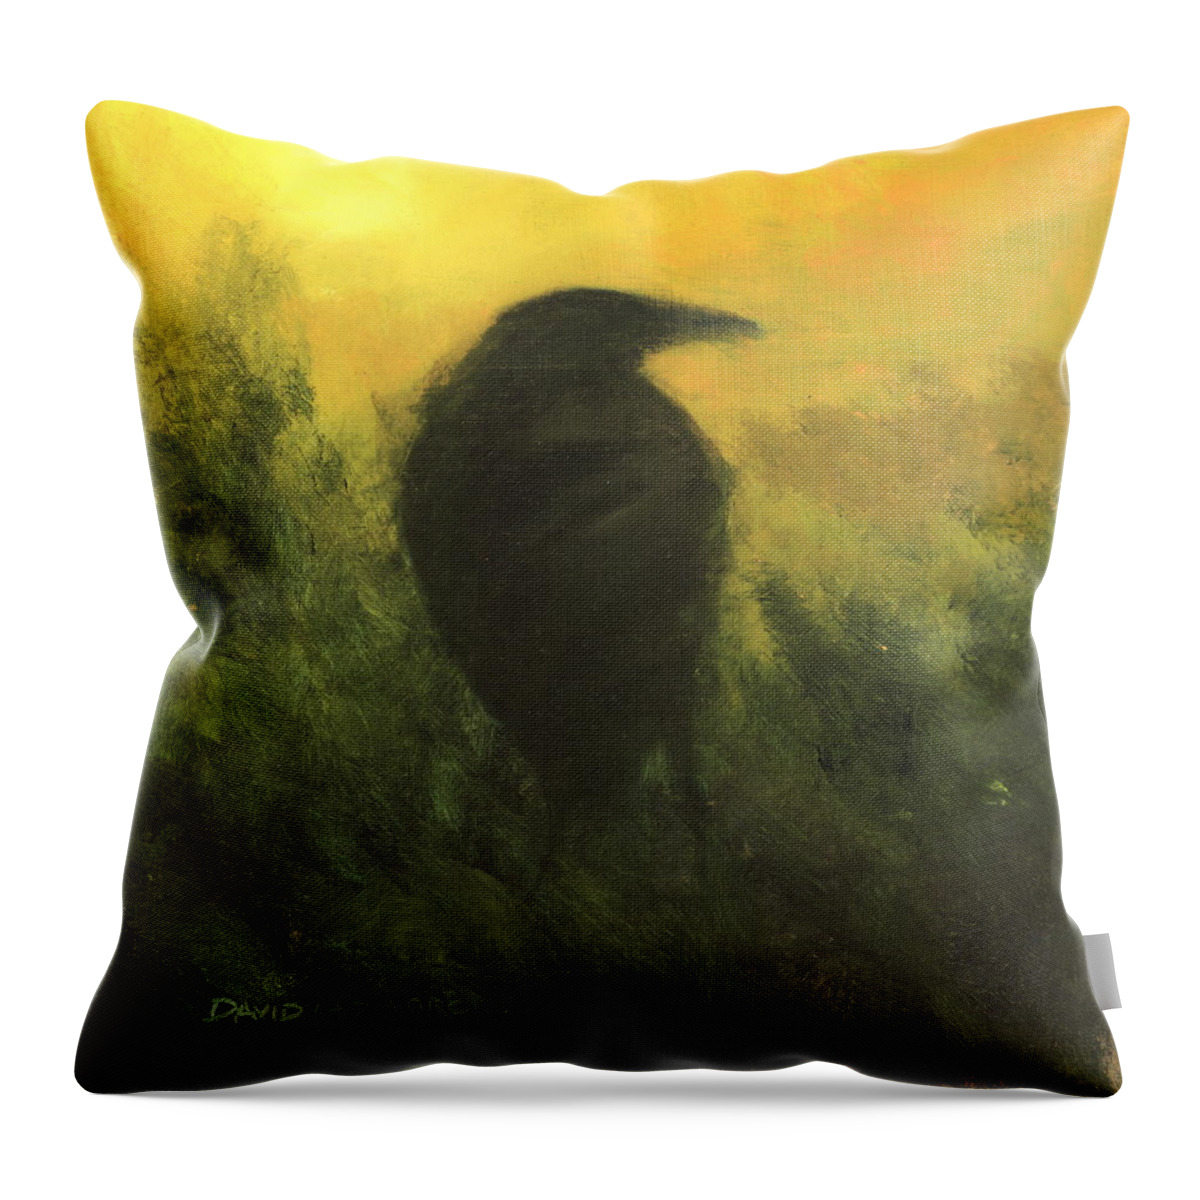 Crow Throw Pillow featuring the painting Crow 5 by David Ladmore